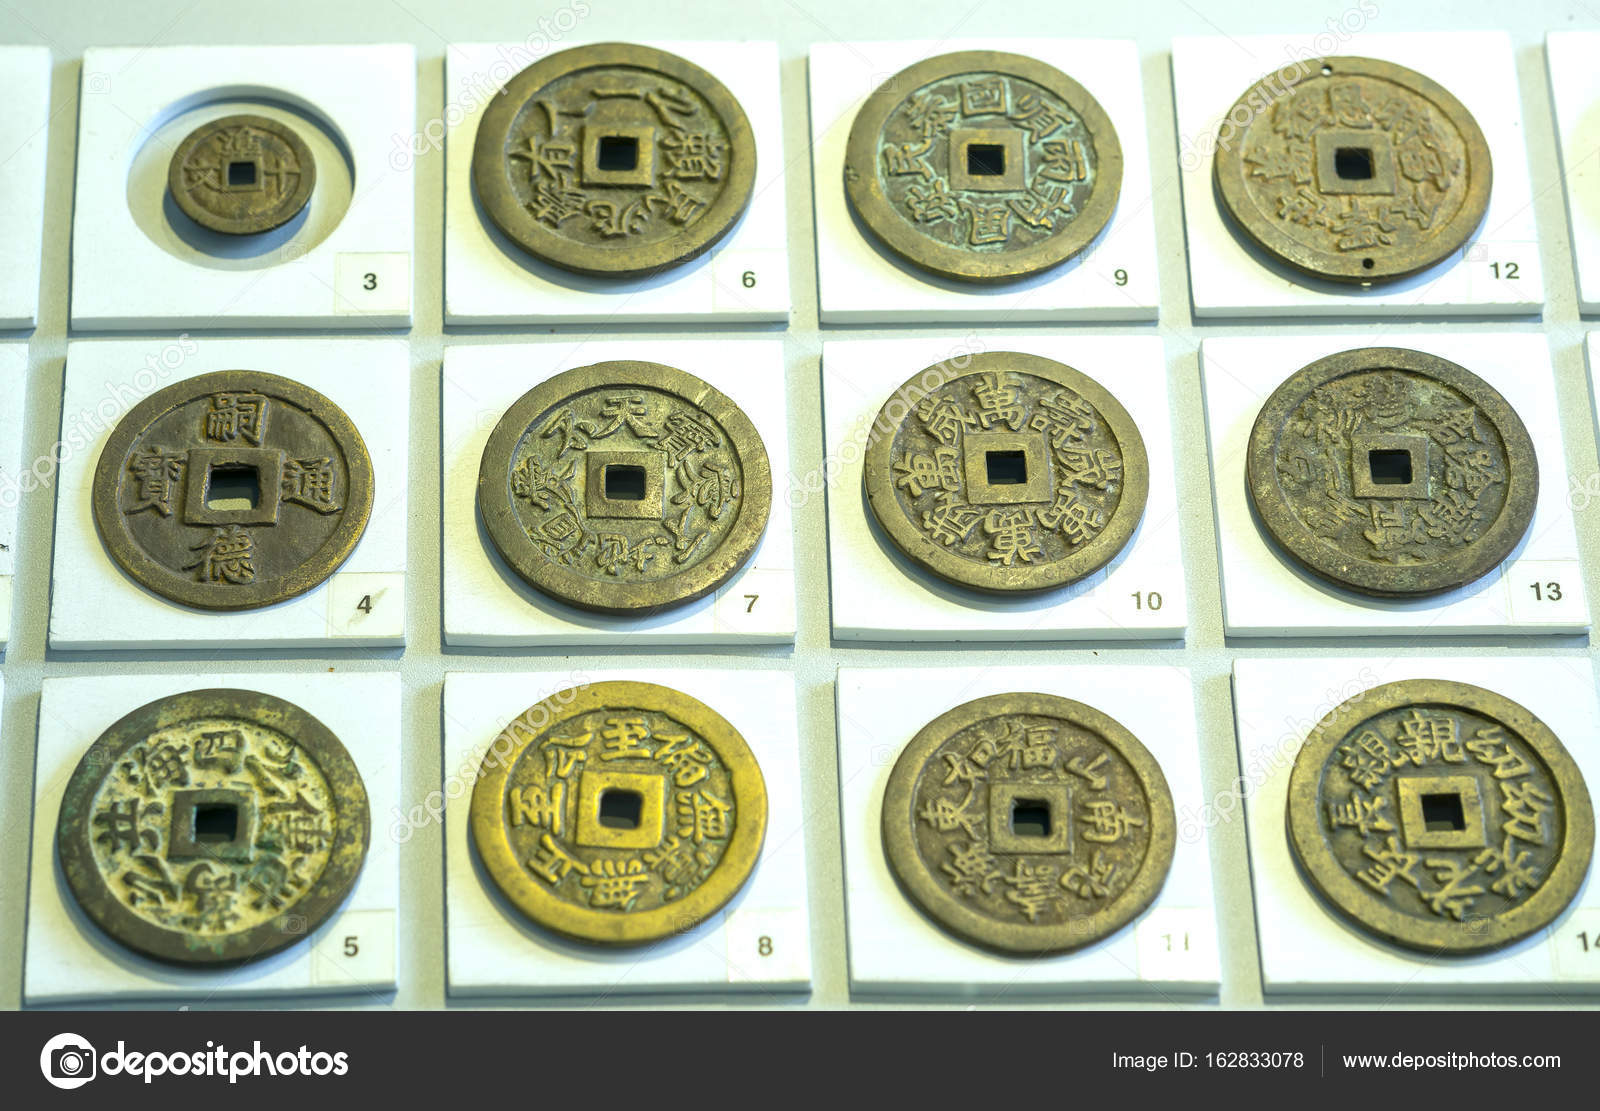 The ancient Chinese coins of the various dynasties in the museum are ...